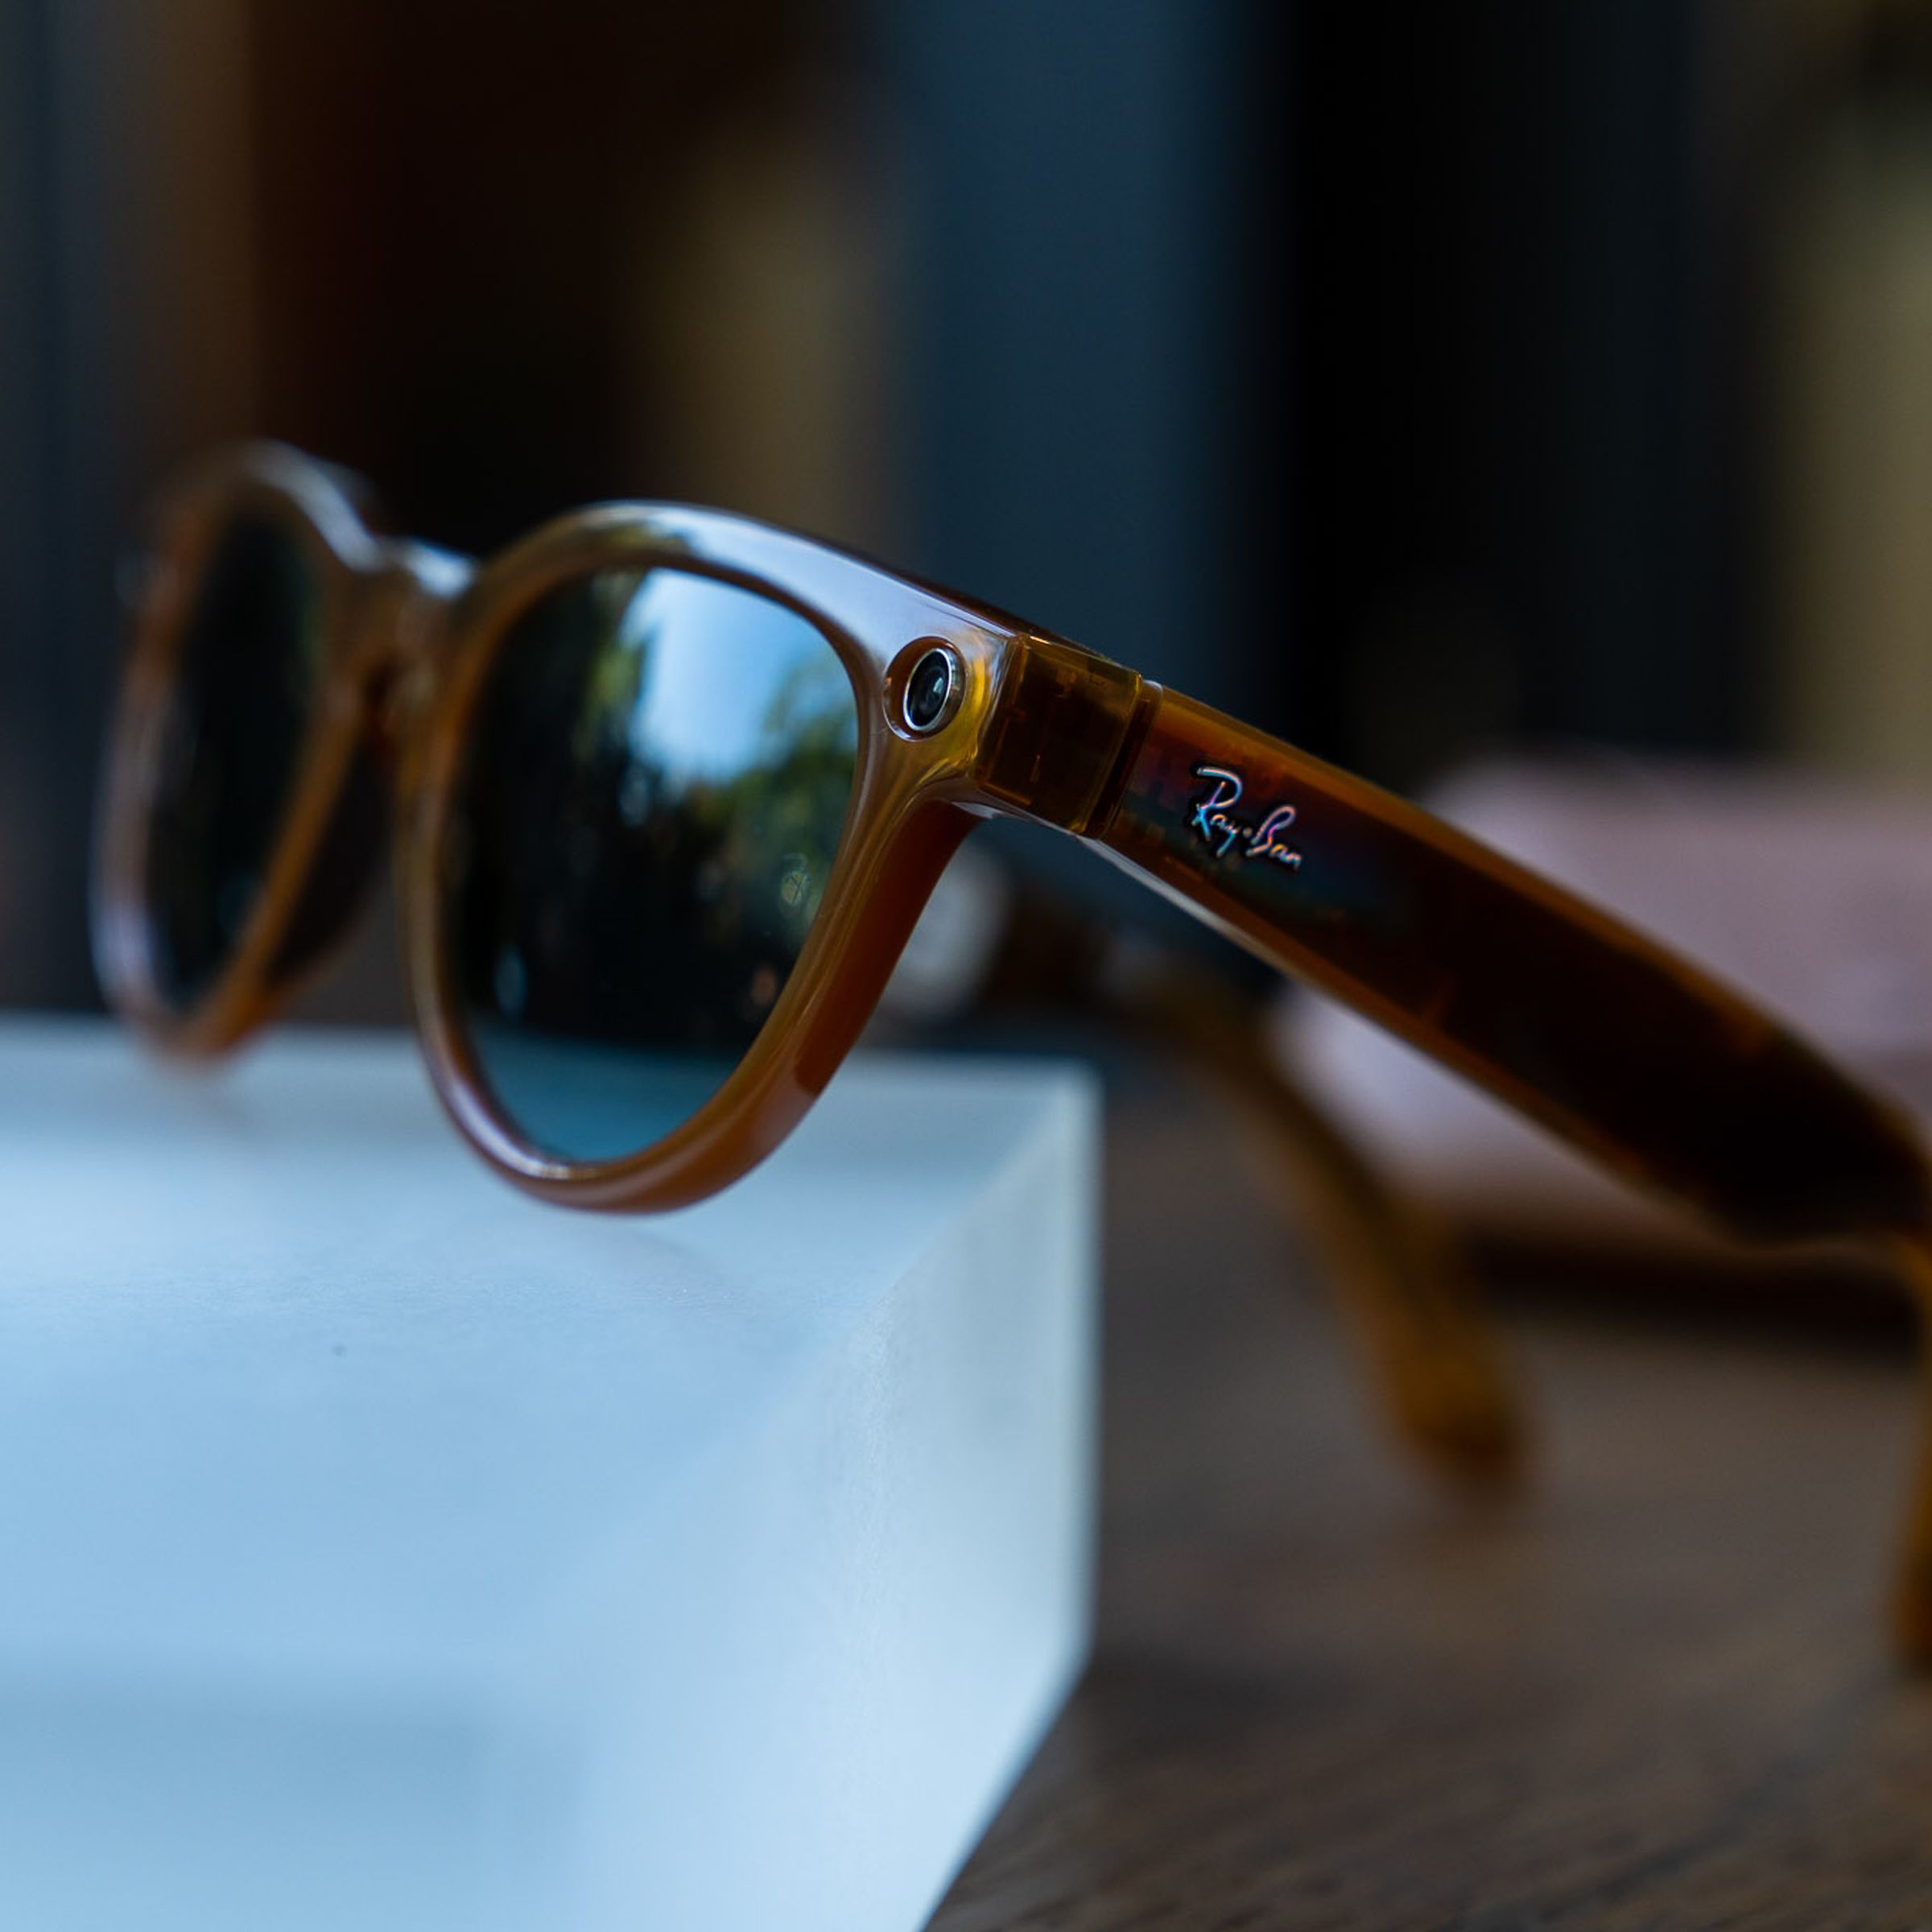 Ray-Ban Meta Smart Glasses propped up on a glass block